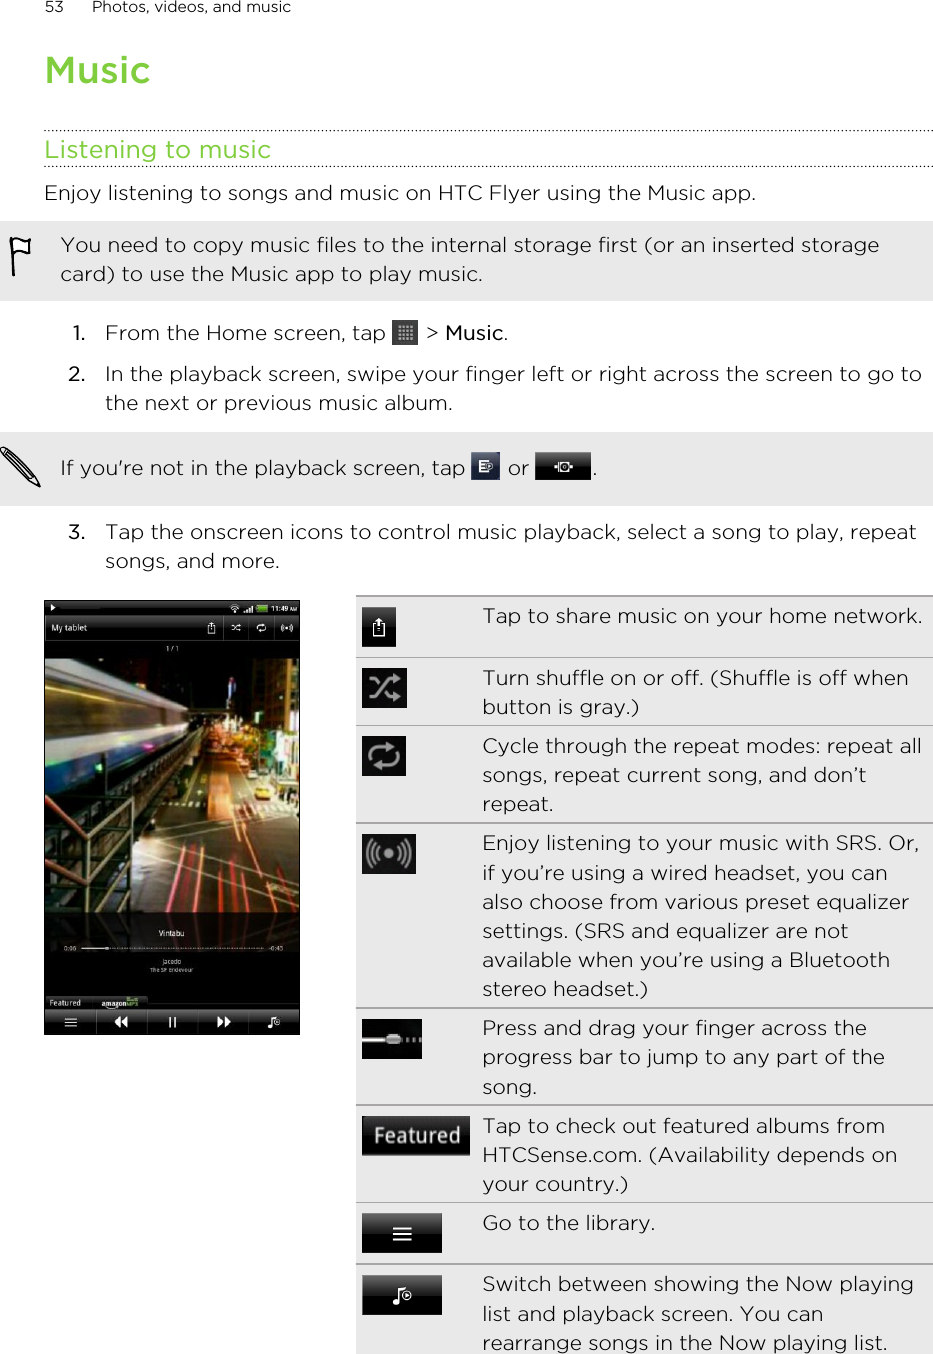 MusicListening to musicEnjoy listening to songs and music on HTC Flyer using the Music app.You need to copy music files to the internal storage first (or an inserted storagecard) to use the Music app to play music.1. From the Home screen, tap   &gt; Music.2. In the playback screen, swipe your finger left or right across the screen to go tothe next or previous music album. If you&apos;re not in the playback screen, tap   or  .3. Tap the onscreen icons to control music playback, select a song to play, repeatsongs, and more.Tap to share music on your home network.Turn shuffle on or off. (Shuffle is off whenbutton is gray.)Cycle through the repeat modes: repeat allsongs, repeat current song, and don’trepeat.Enjoy listening to your music with SRS. Or,if you’re using a wired headset, you canalso choose from various preset equalizersettings. (SRS and equalizer are notavailable when you’re using a Bluetoothstereo headset.)Press and drag your finger across theprogress bar to jump to any part of thesong.Tap to check out featured albums fromHTCSense.com. (Availability depends onyour country.)Go to the library.Switch between showing the Now playinglist and playback screen. You canrearrange songs in the Now playing list.53 Photos, videos, and music